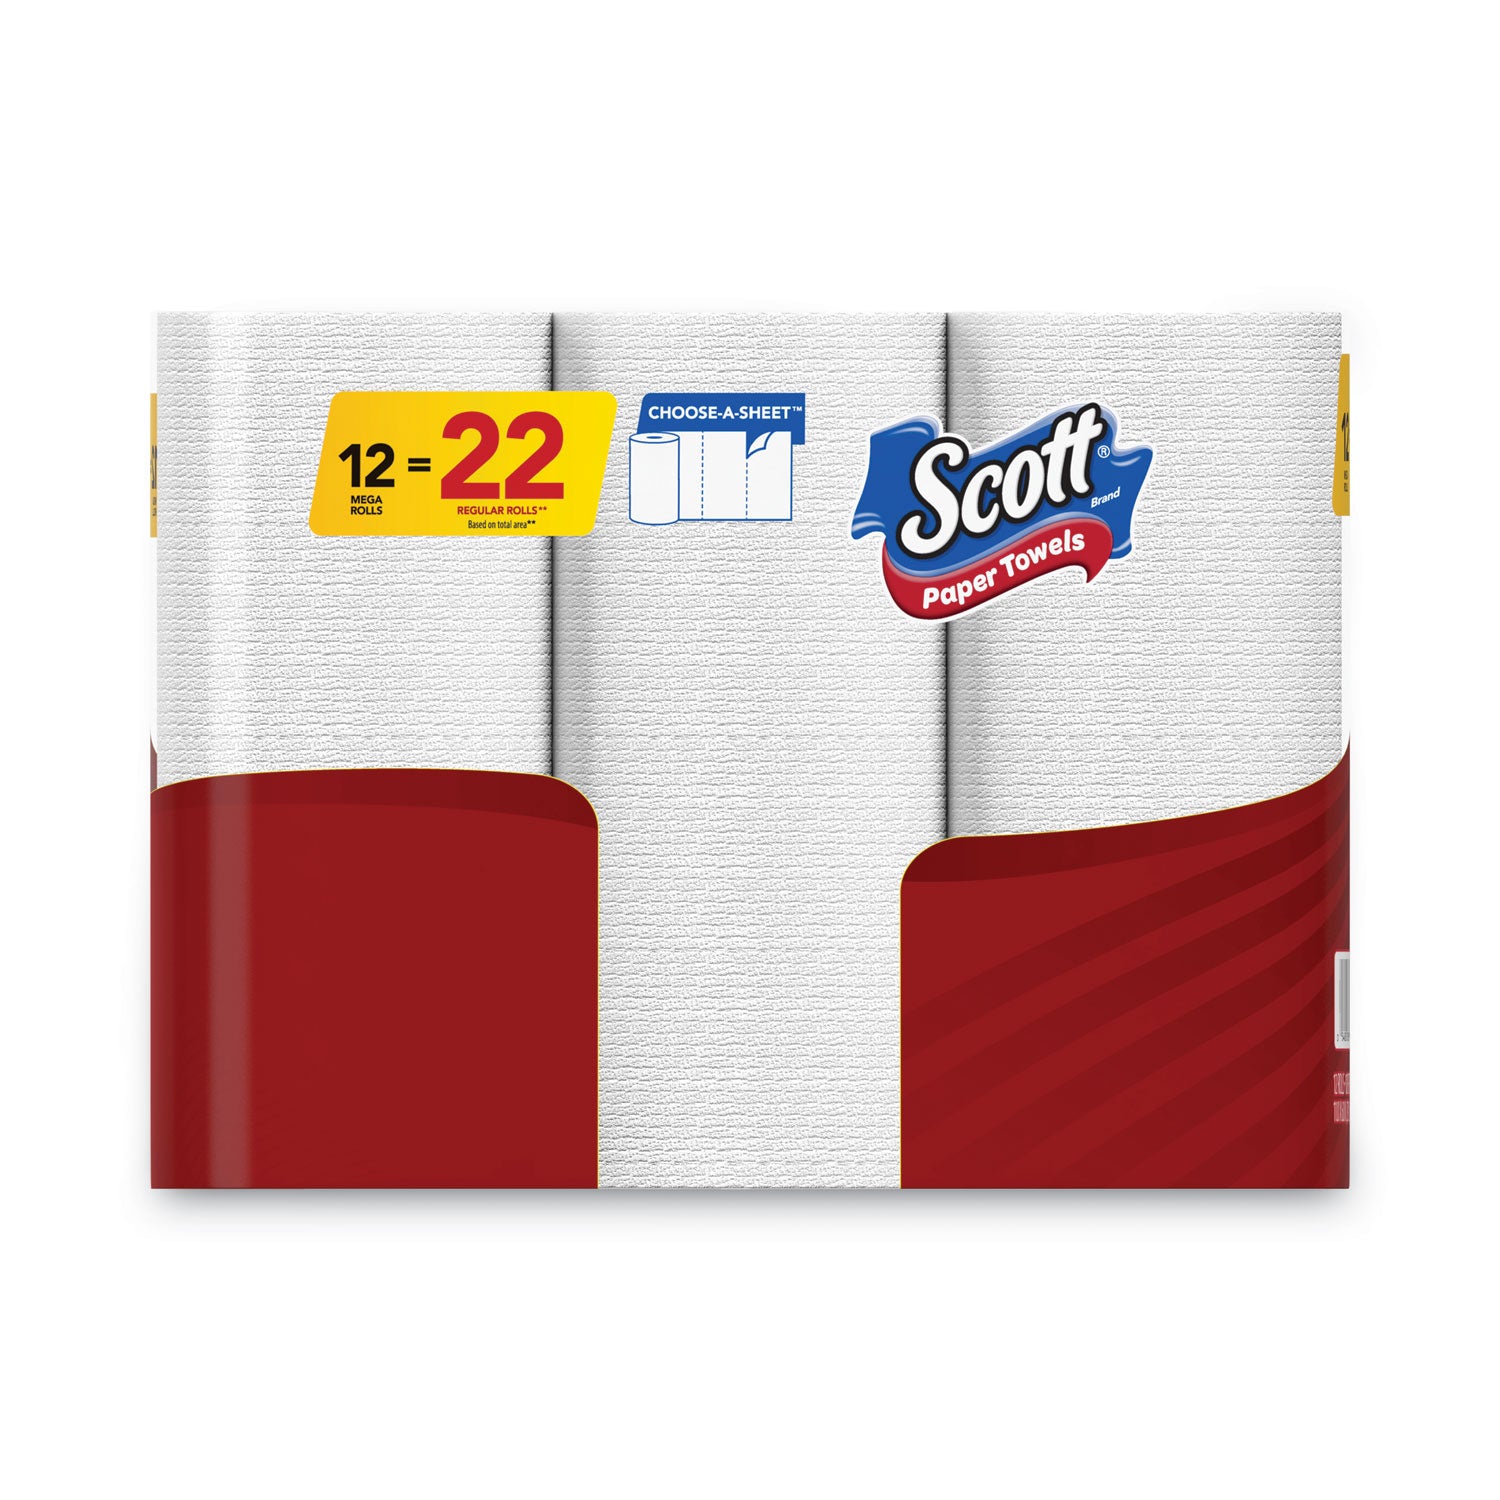 choose-a-sheet-mega-kitchen-roll-paper-towels-white-1-ply-65-x-11-102-sheets-roll-12-rolls-pack_kcc38869 - 4